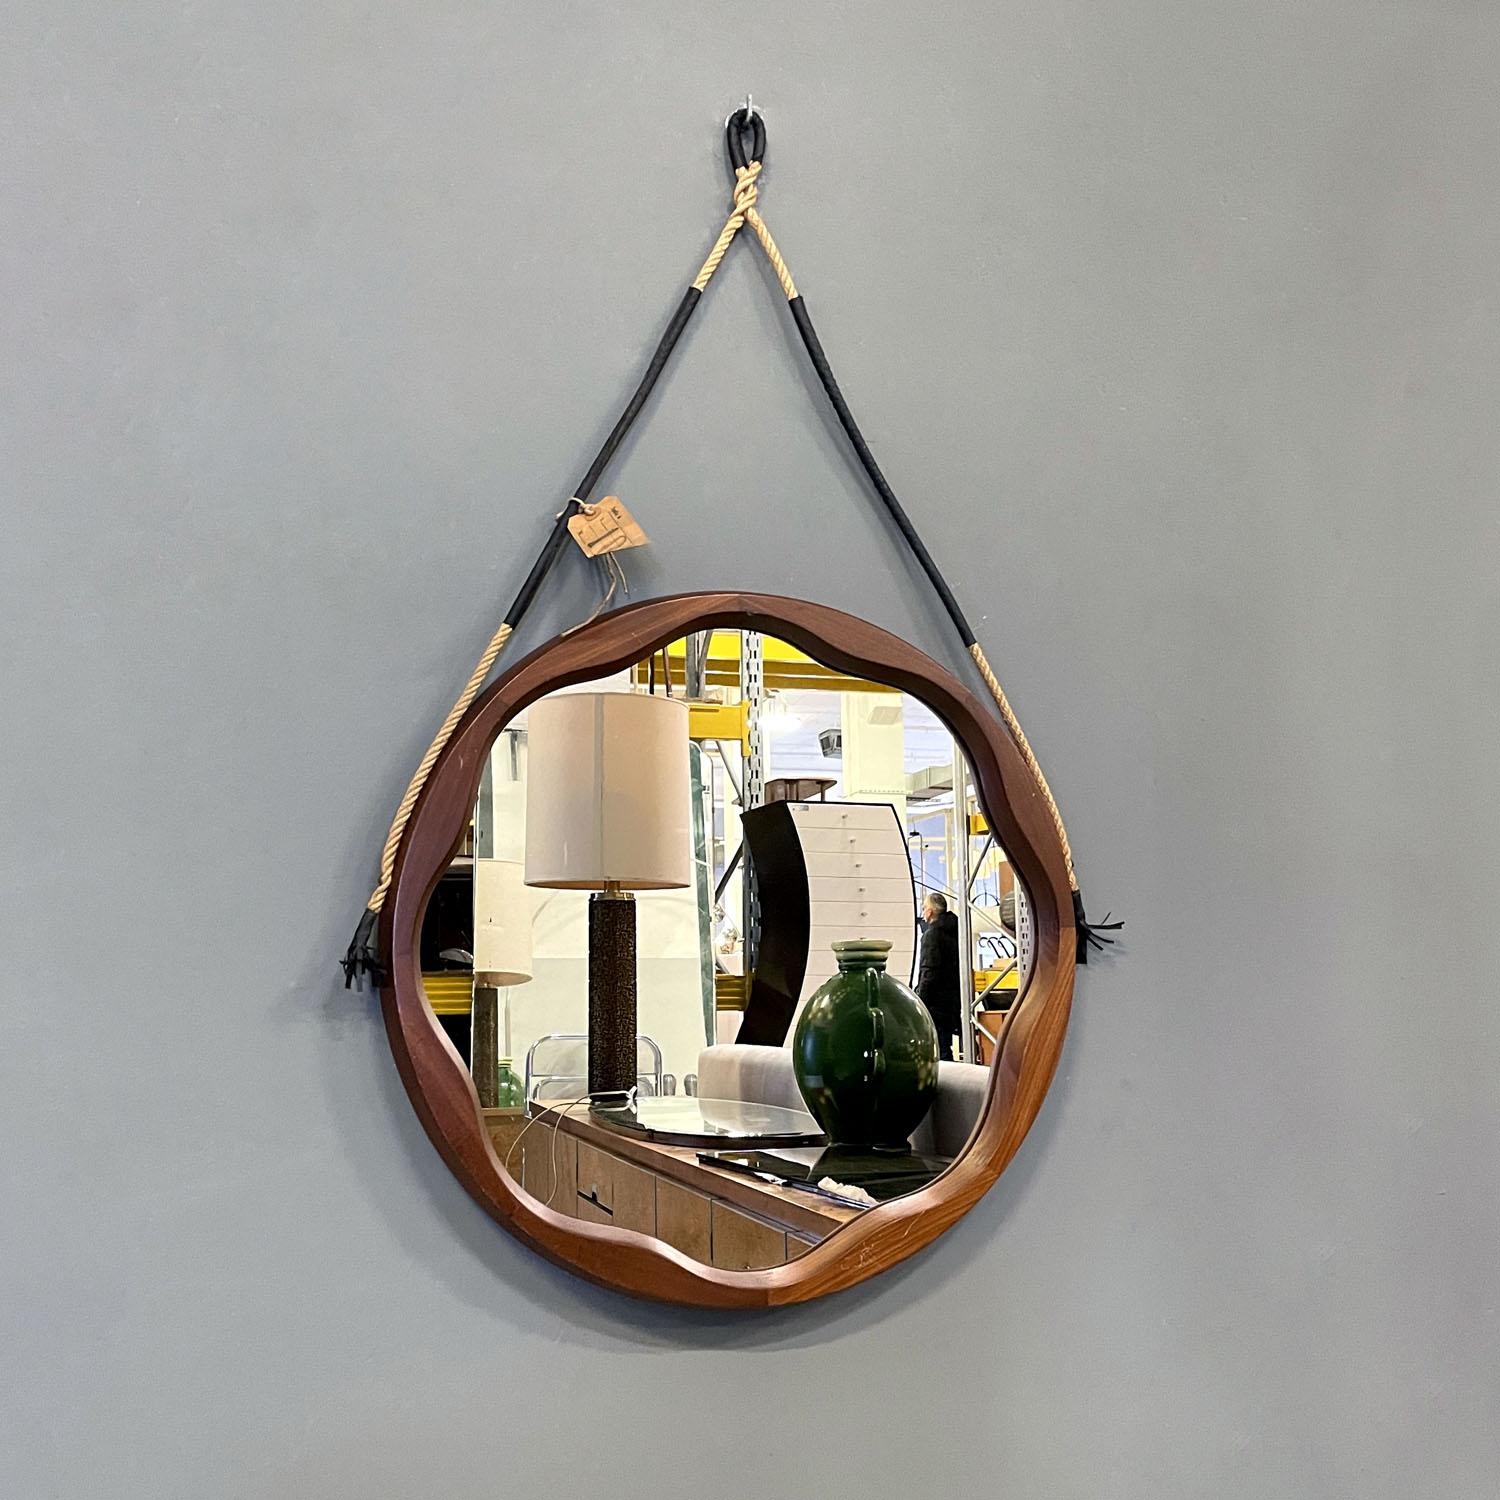 Italian mid-century modern rounded wooden wall mirror with rope, 1960s
Round wooden wall mirror. The frame on the inside is shaped with regular wavy lines to create a decoration. The frame is thick and the mirror part remains internal. To hang the